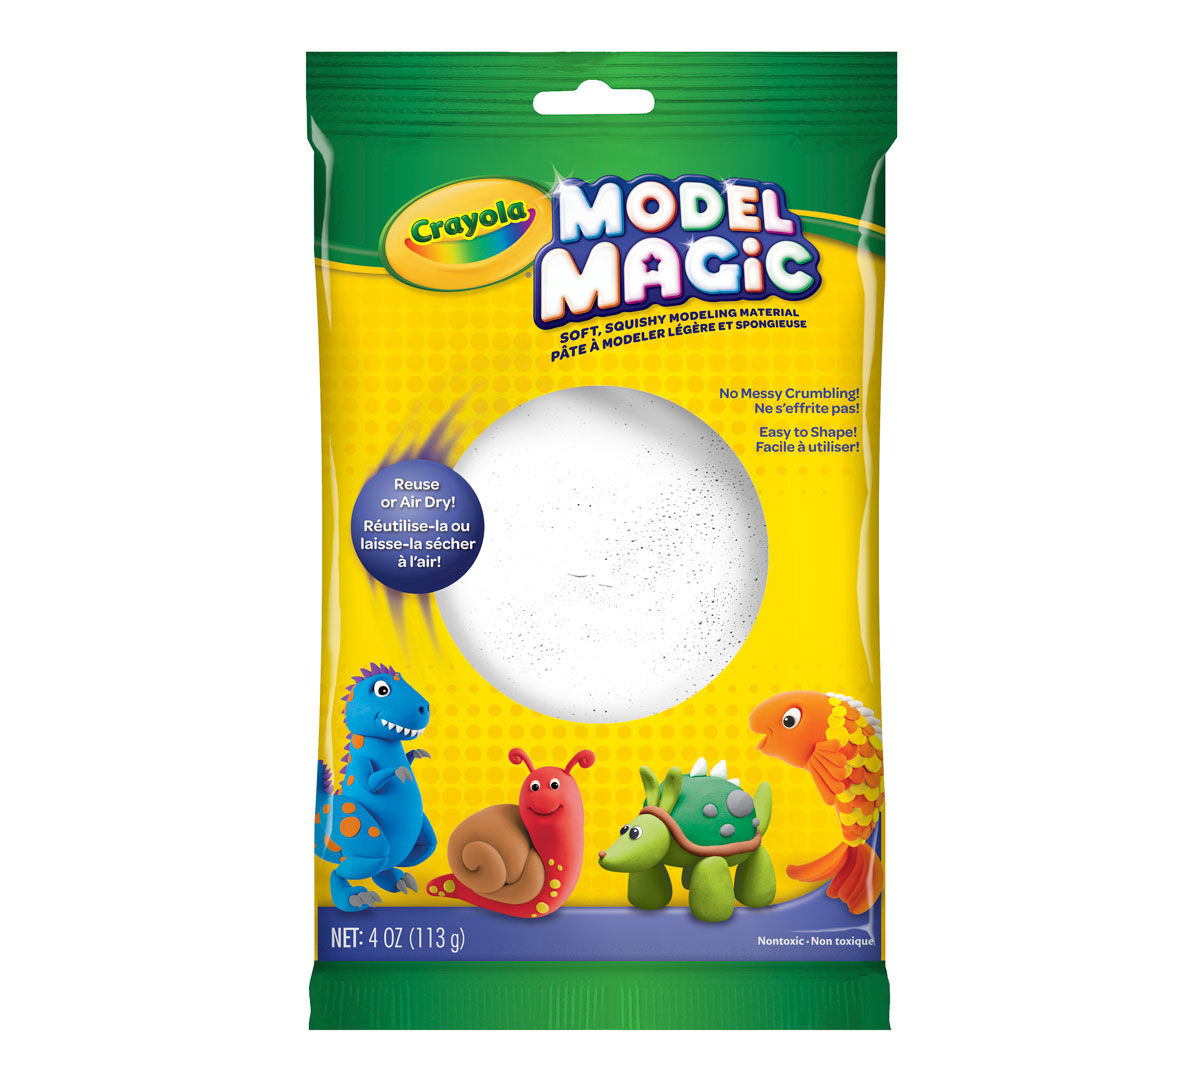 Lot of 4 Crayola Model Magic Soft Squishy Material White Yellow Blue Red 